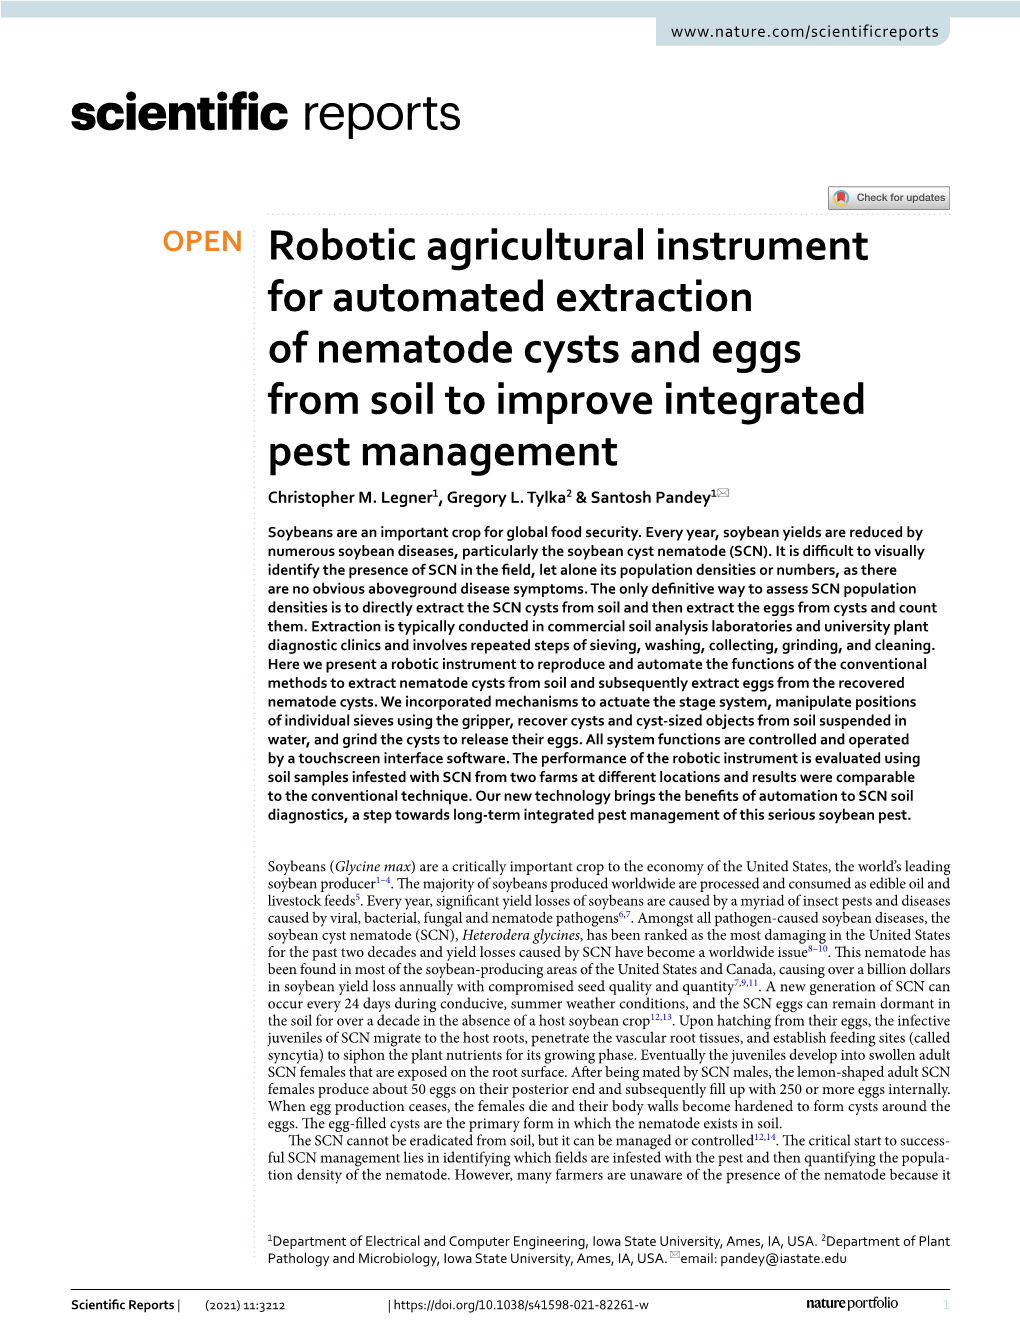 Robotic Agricultural Instrument for Automated Extraction of Nematode Cysts and Eggs from Soil to Improve Integrated Pest Management Christopher M